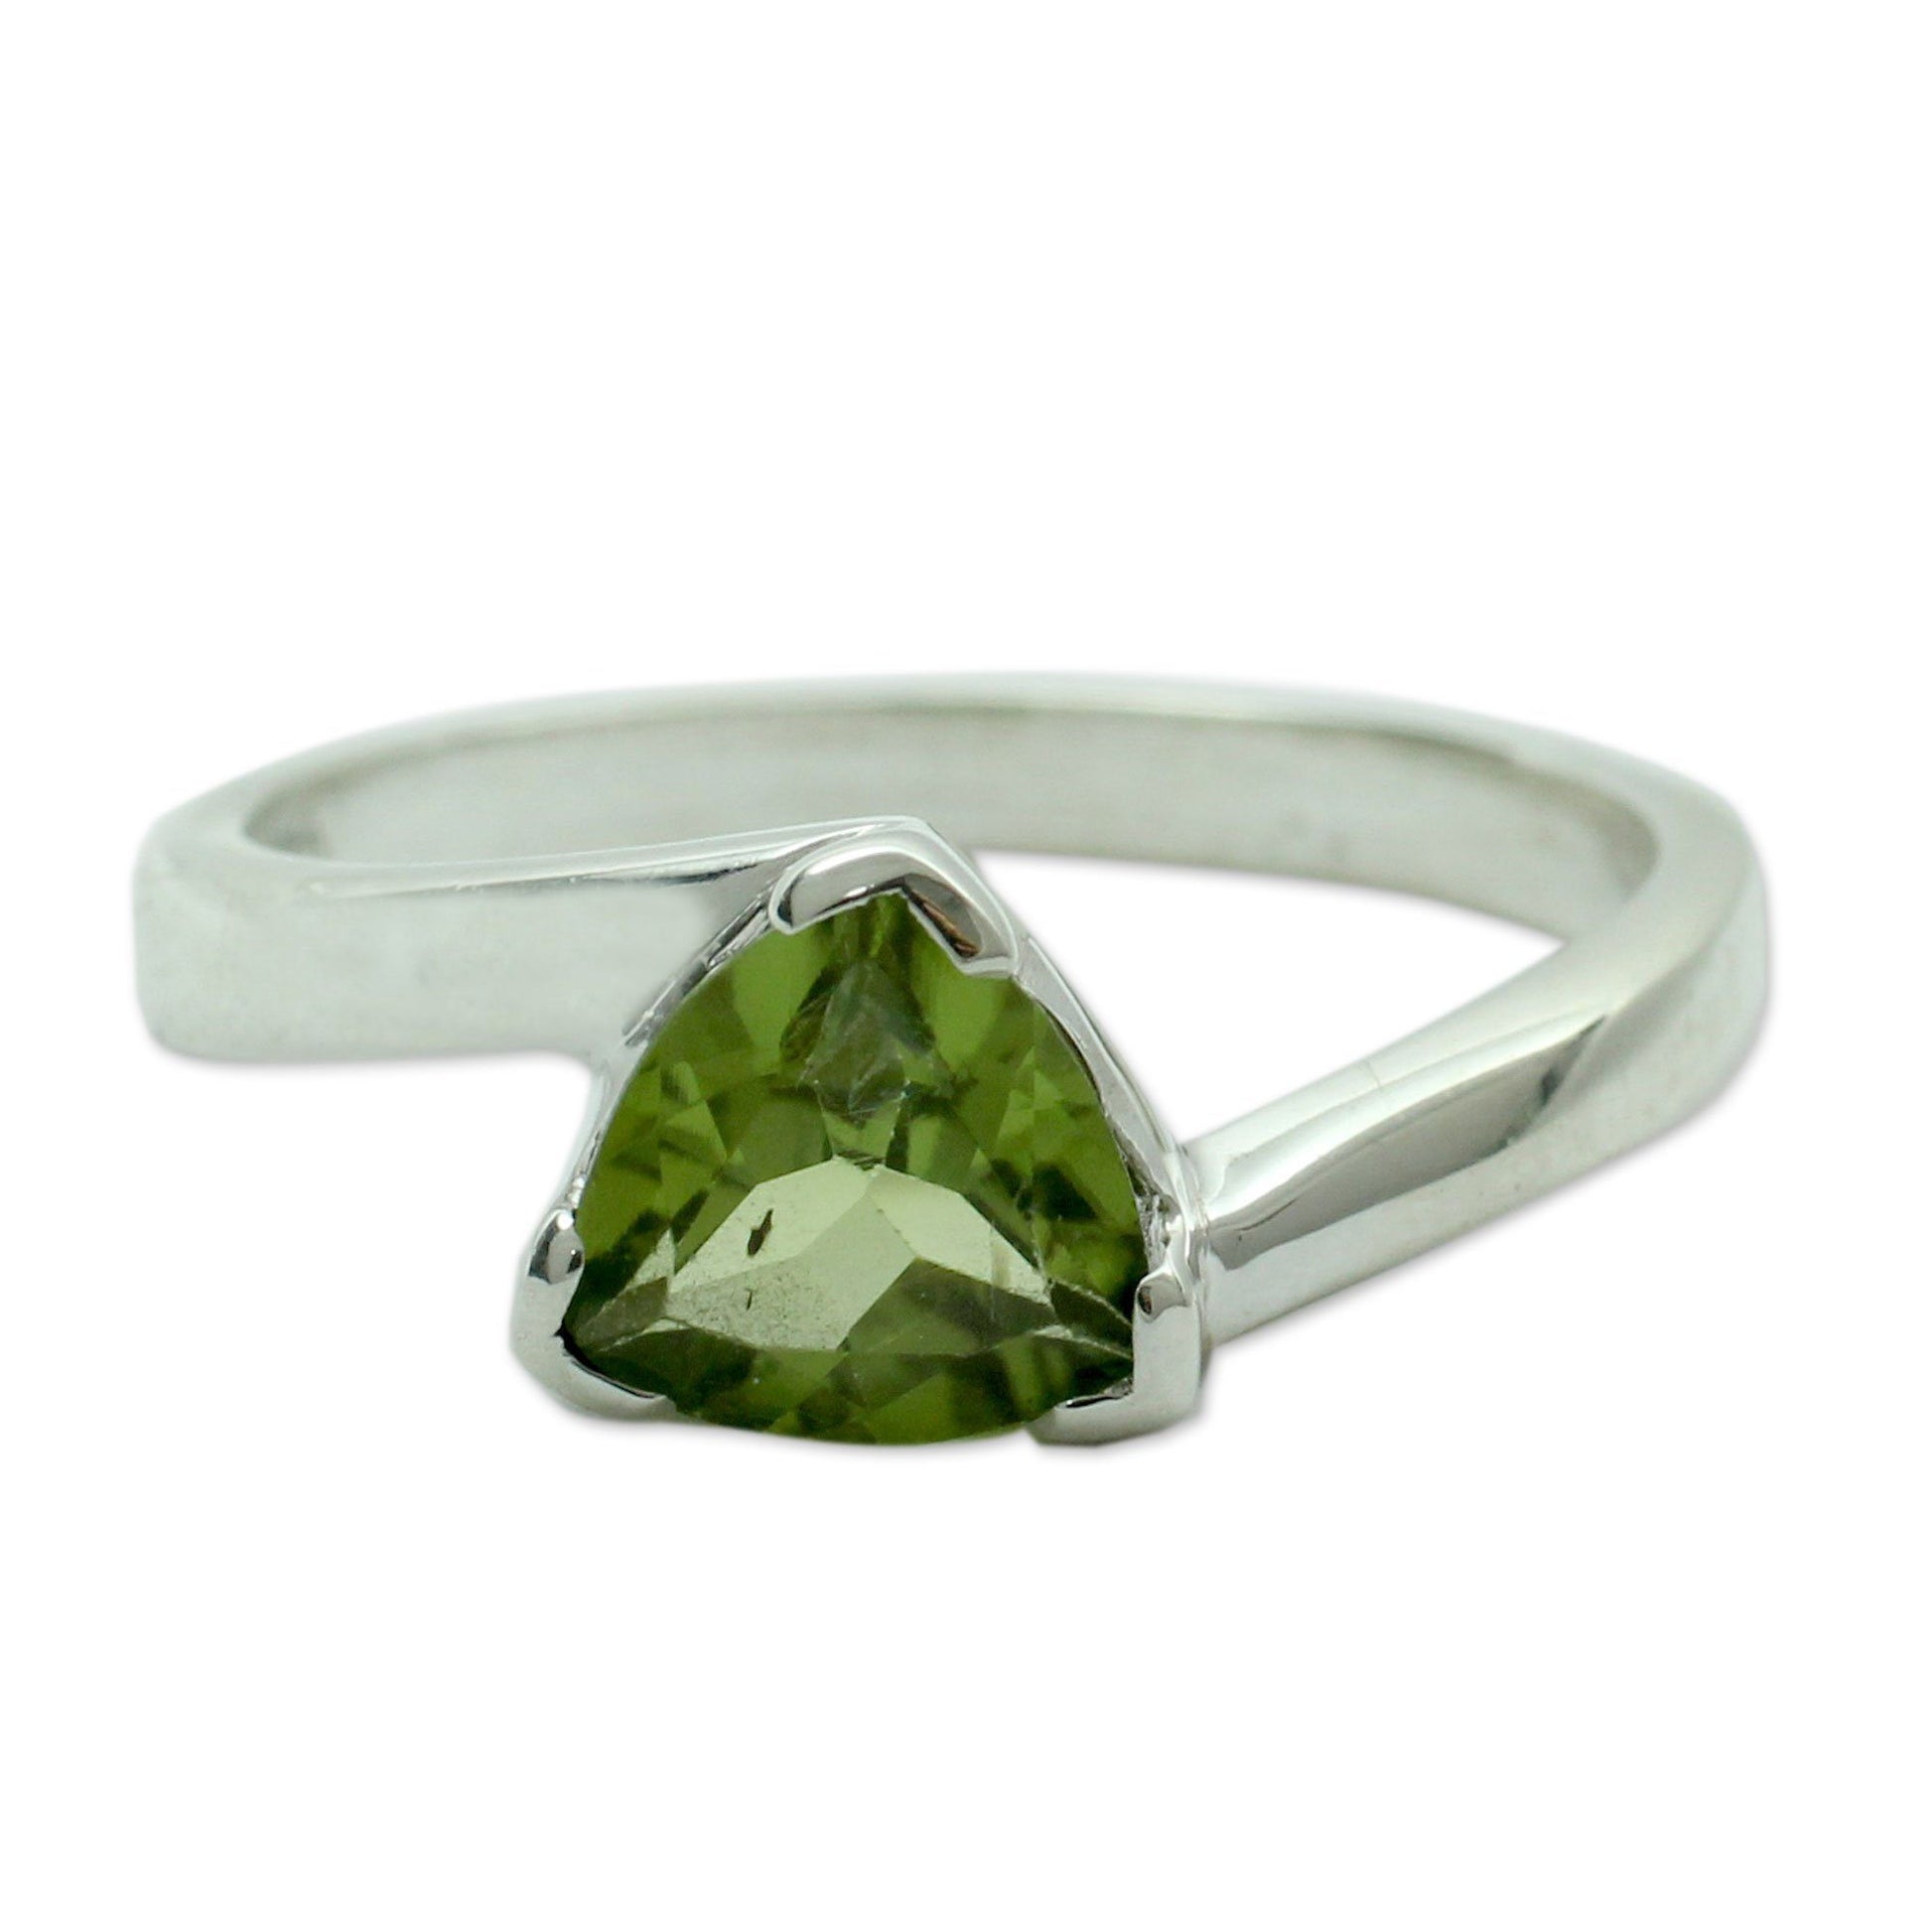 NOVICA - Sterling Silver & Peridot Solitaire Ring